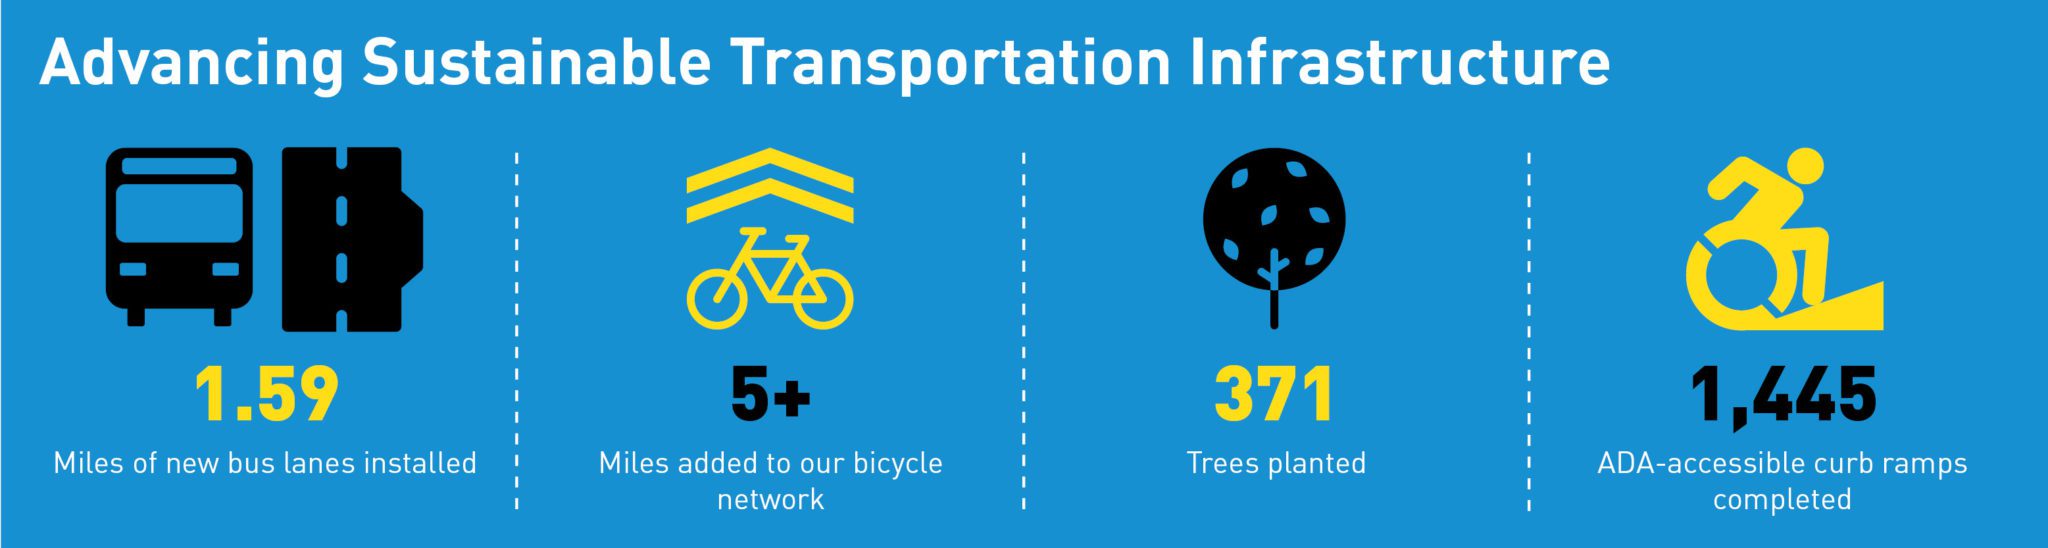 Infographic highlighting measure to advance sustainable transportation infrastructure, including installing 1.59 miles of new bus lanes, adding 5+ miles to our bicycle network, planting 371 trees, and completing 1,445 ADA-accessible curb ramps.